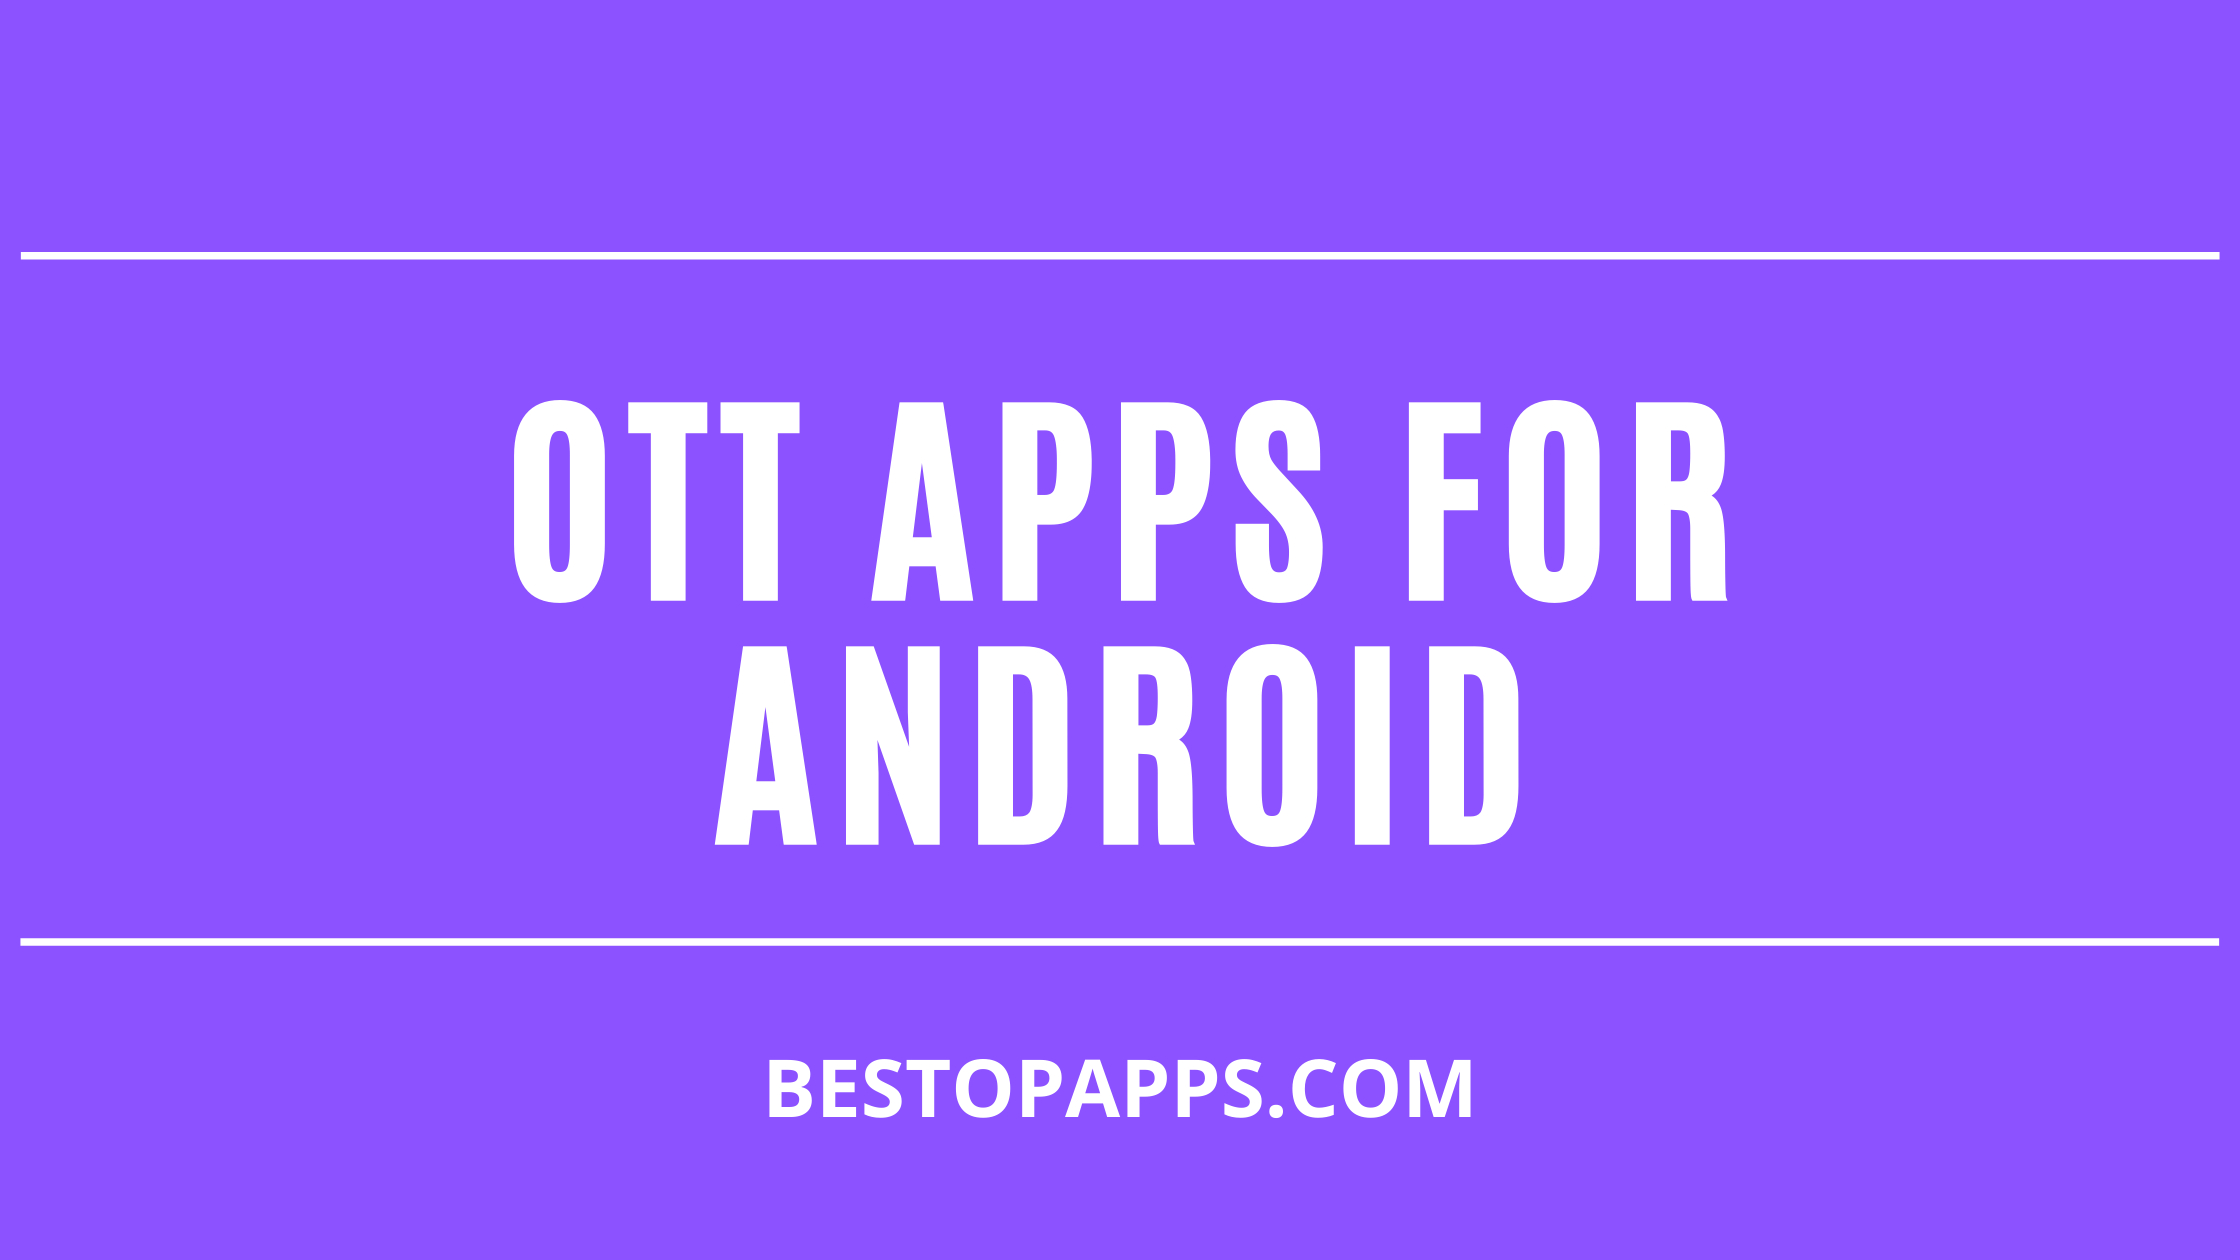 OTT APPS FOR ANDROID